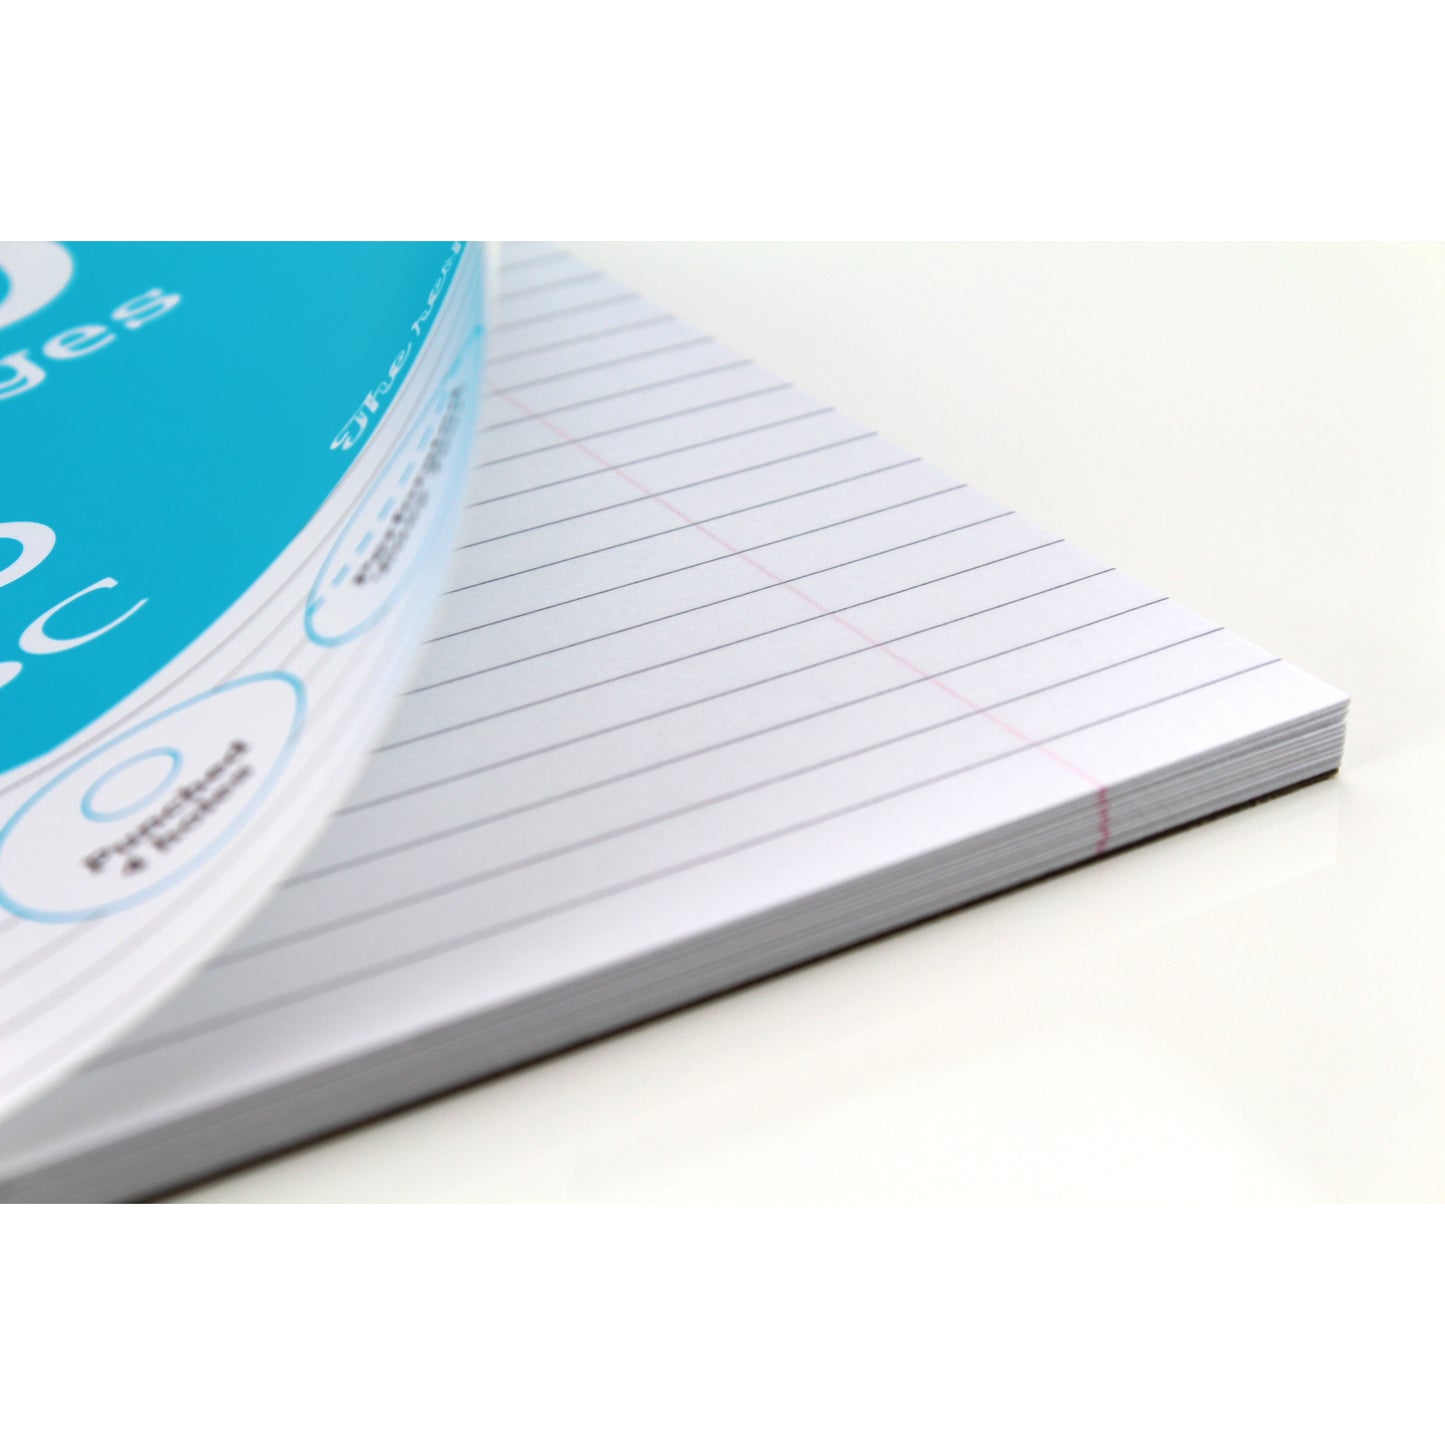 A4 FSC Certified Silvine Refill Pad 160 Pages